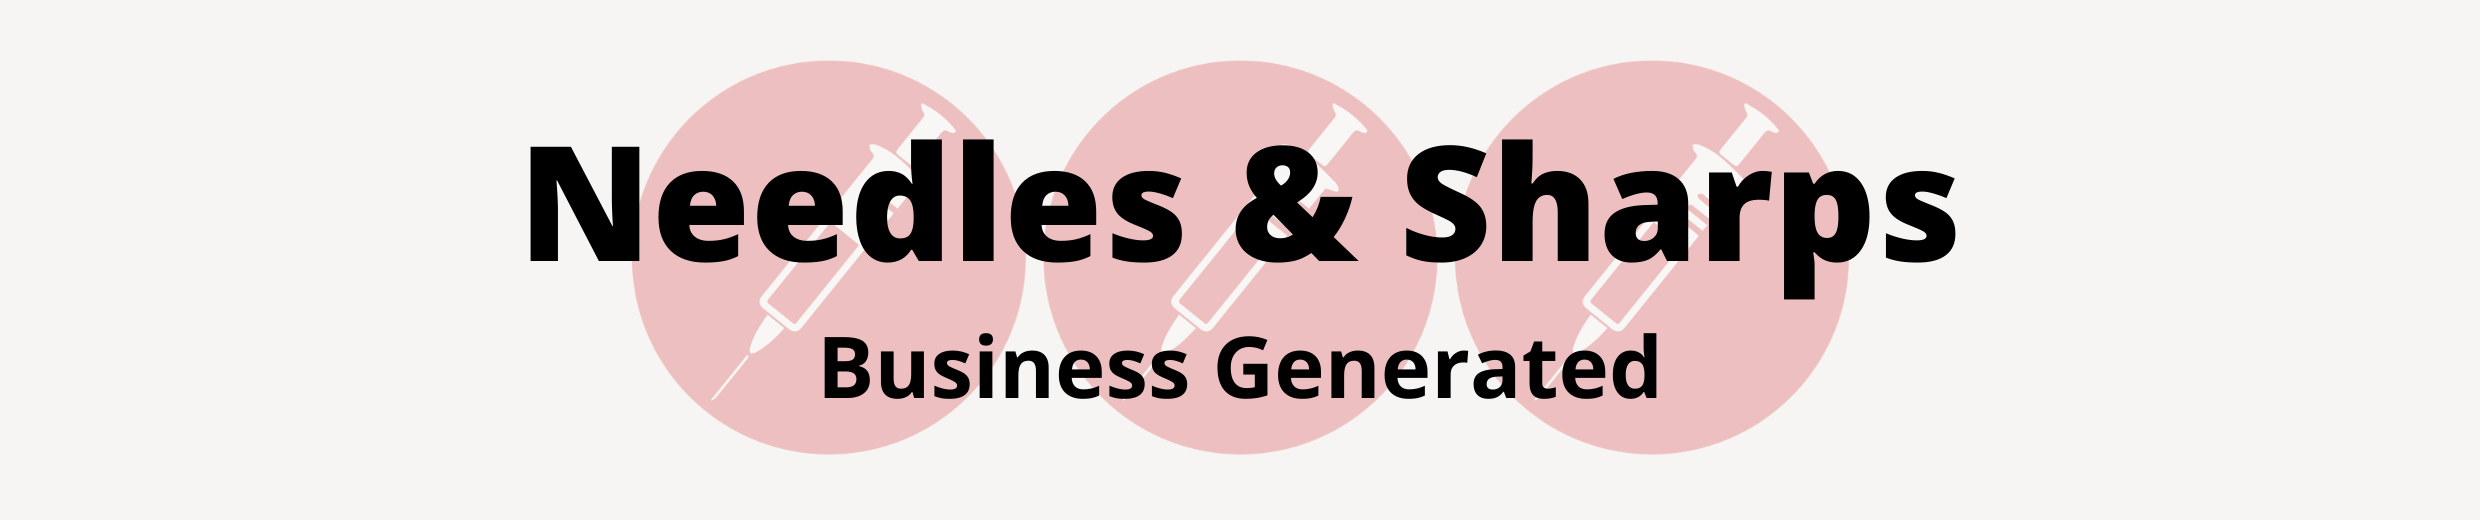 Needles and Sharps - Business Generated